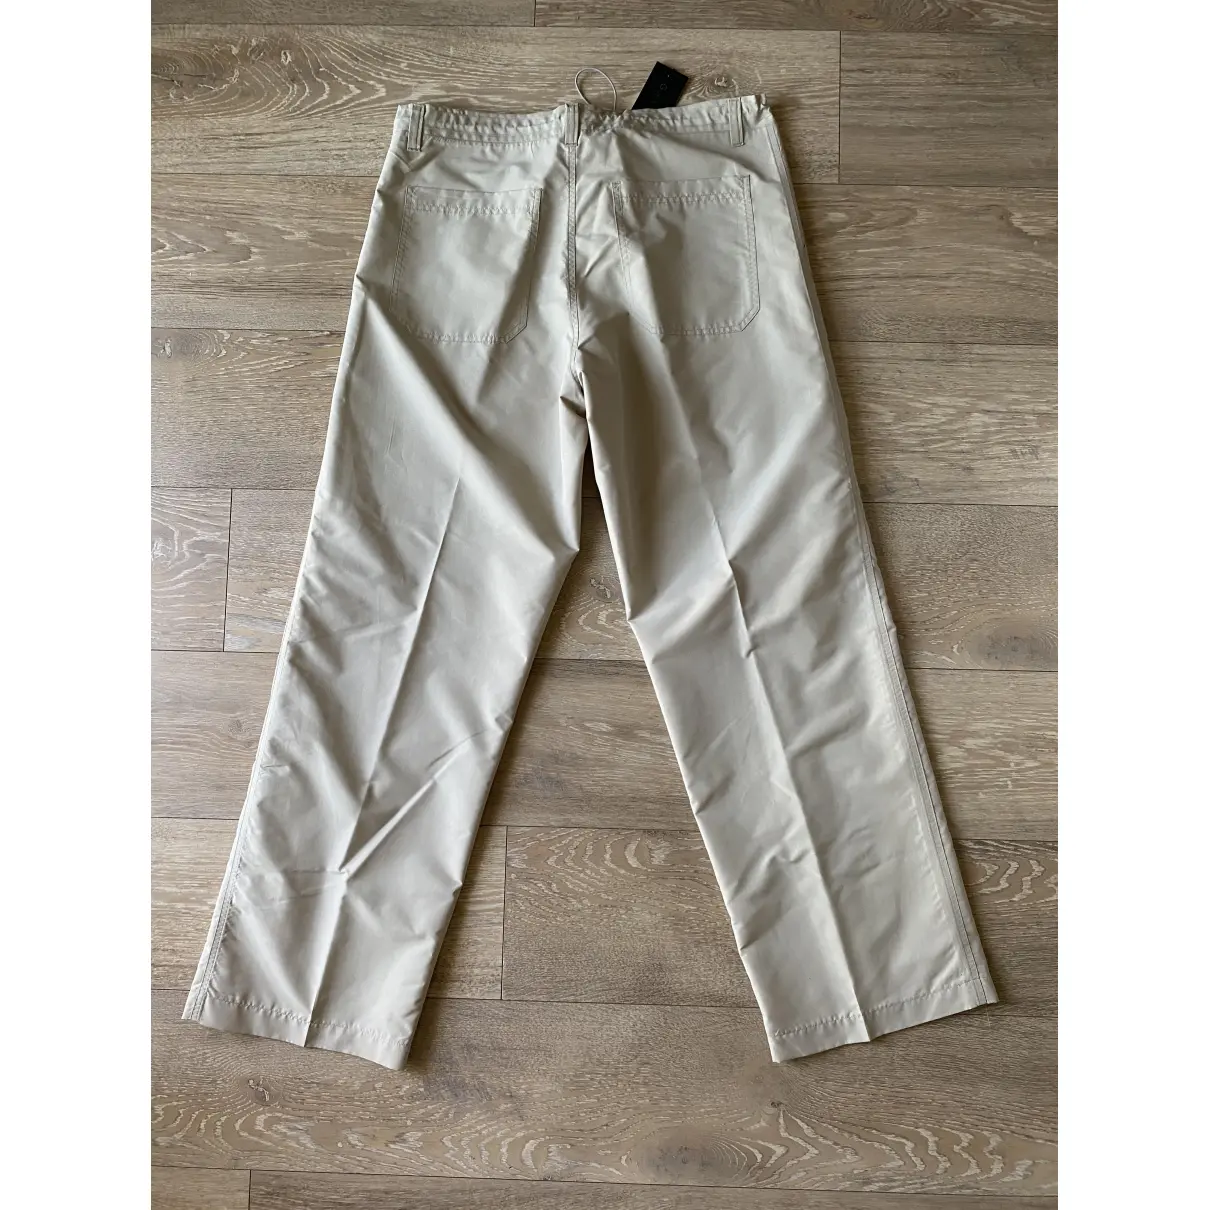 Buy GUESS Trousers online